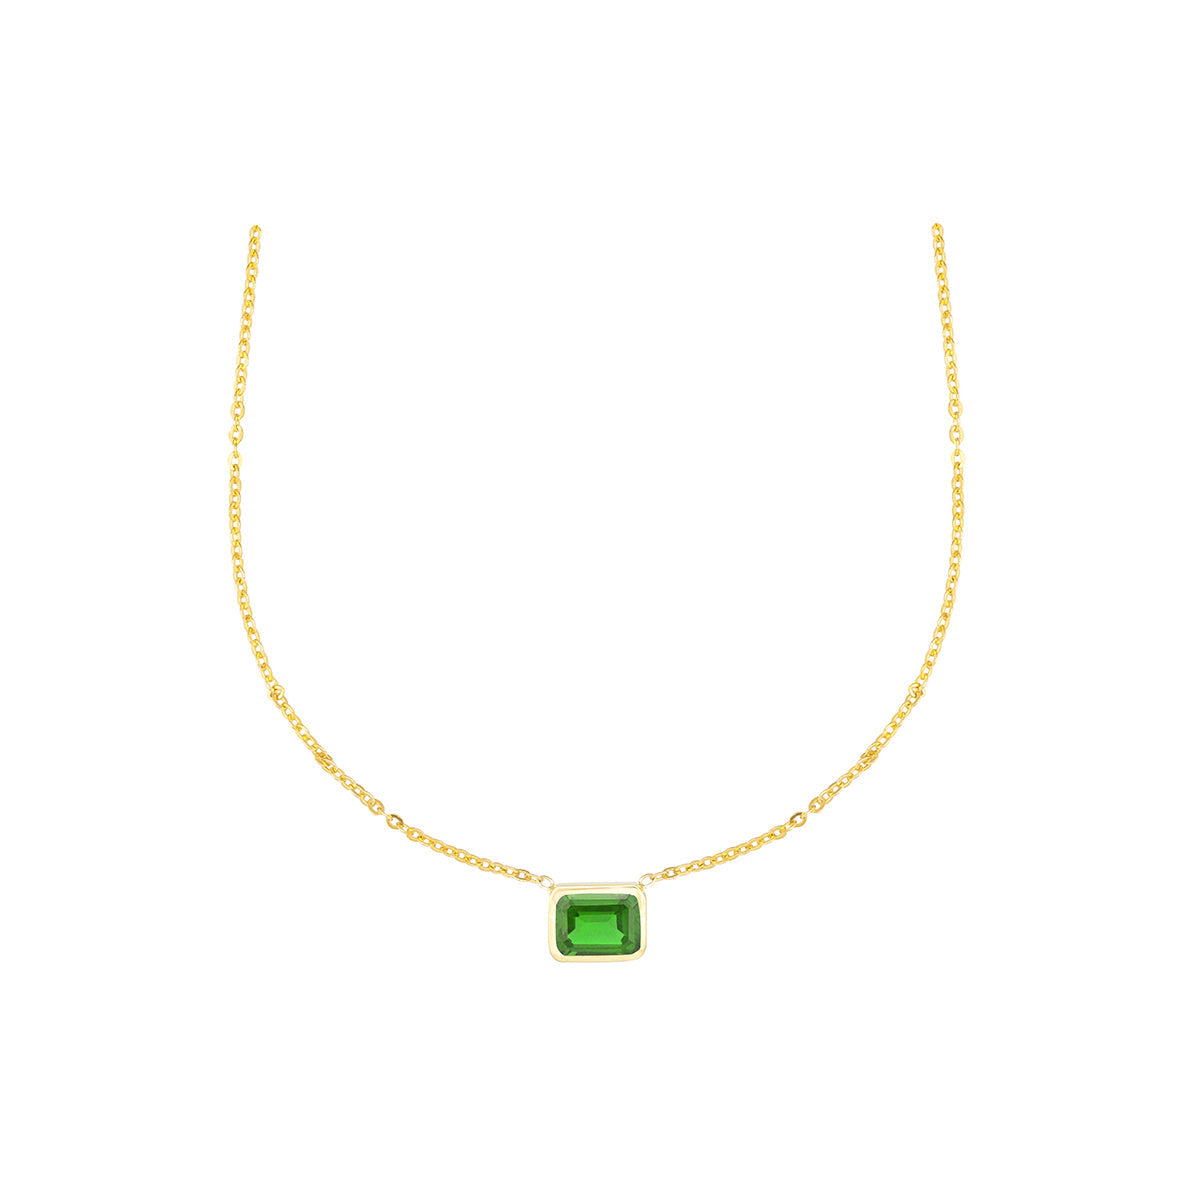 el-mawardy-jewelry-Emerald-Cut-Necklace-in-18k-Yellow-gold